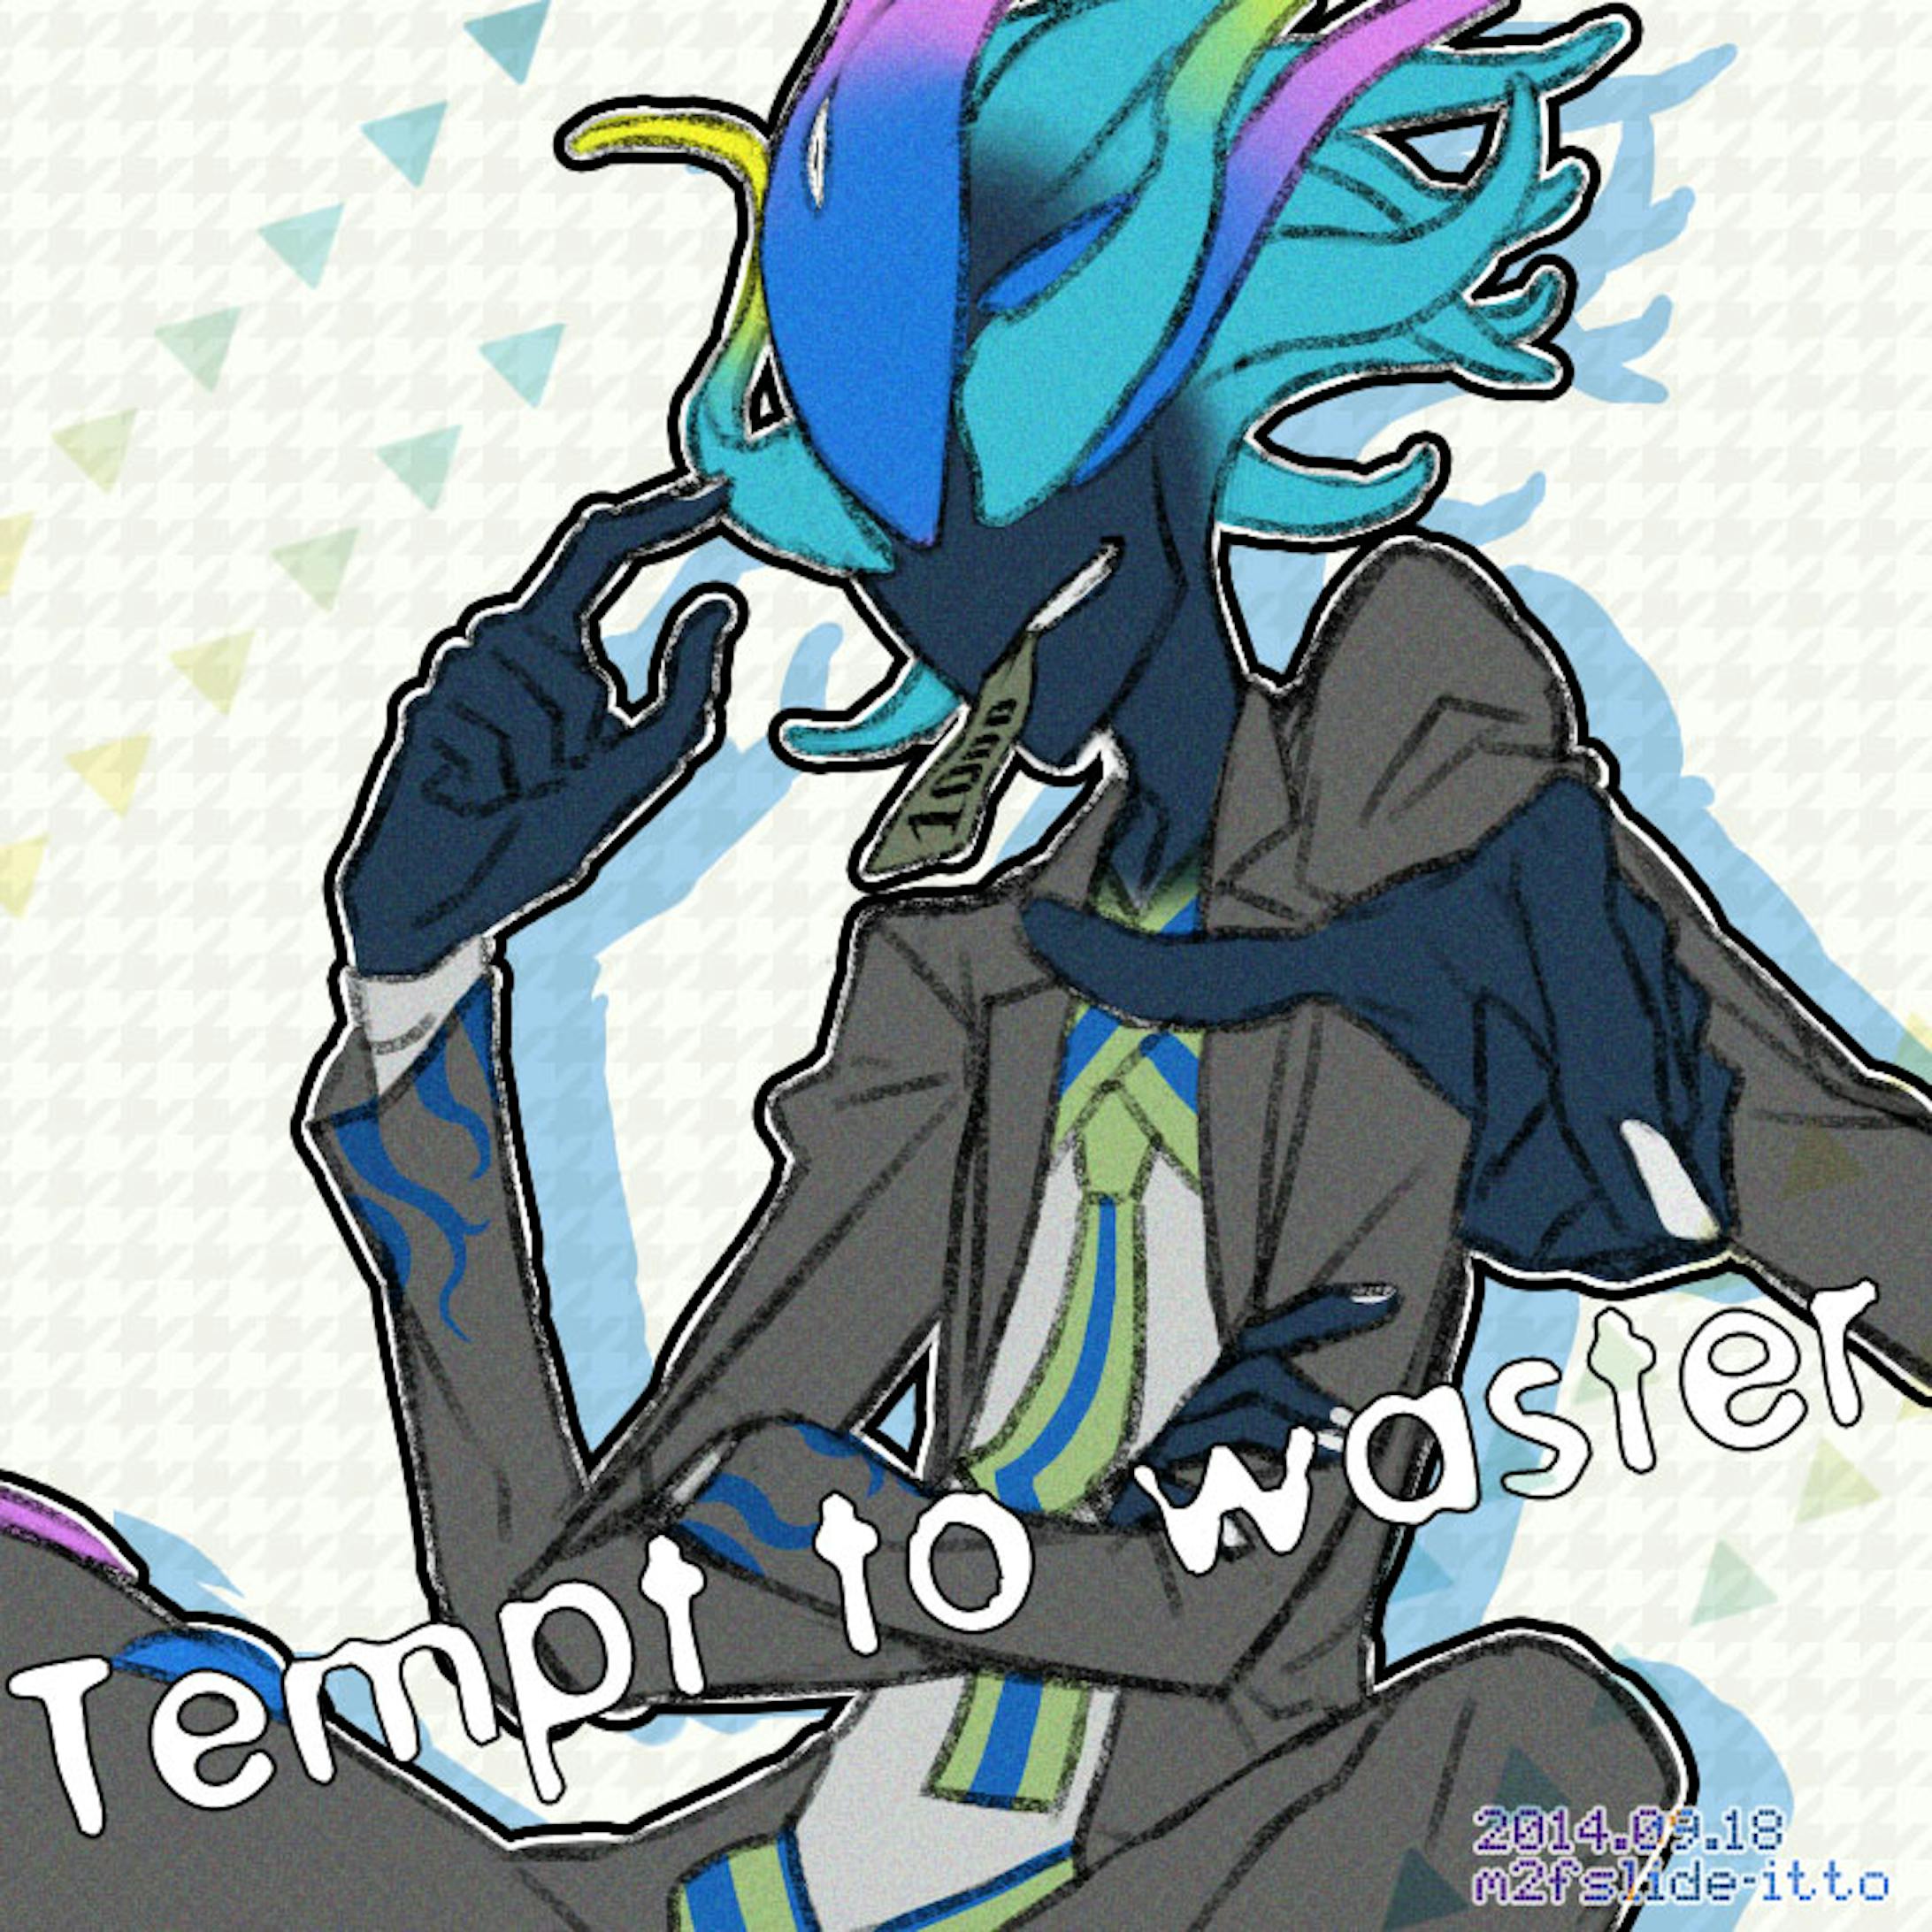 Tempt to waster-9